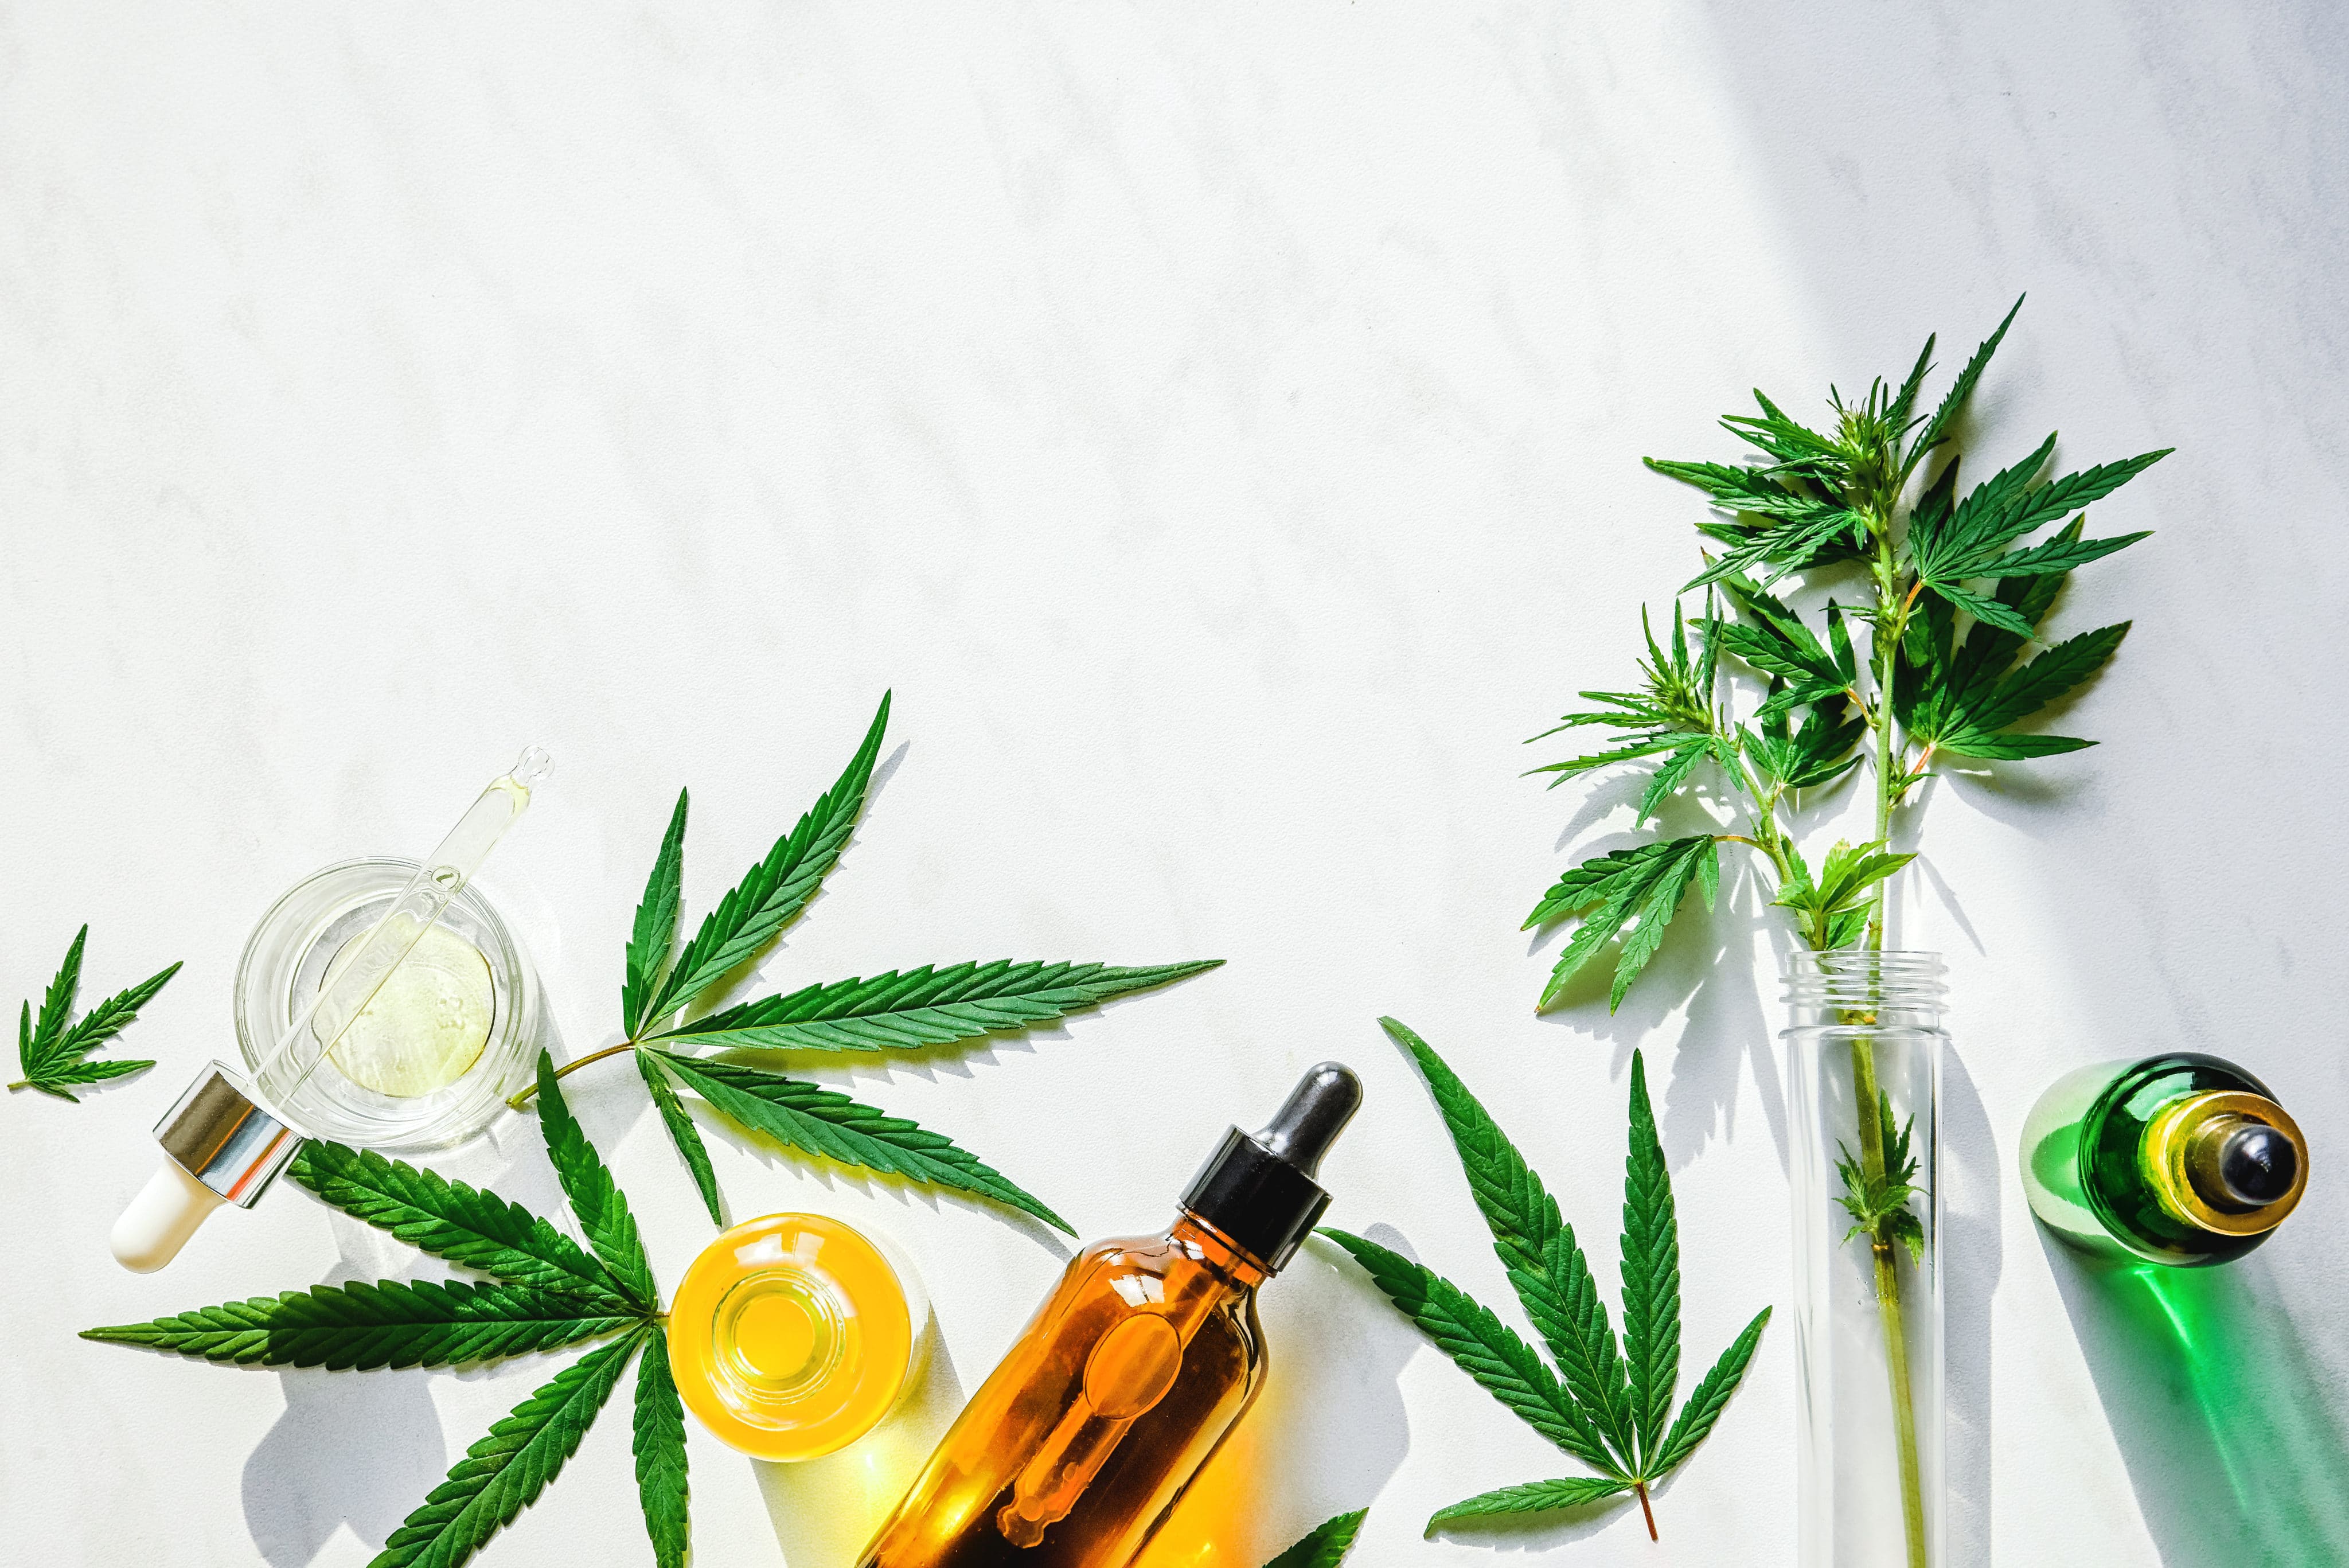 European Commission Makes Two Big Steps on CBD Reform Front